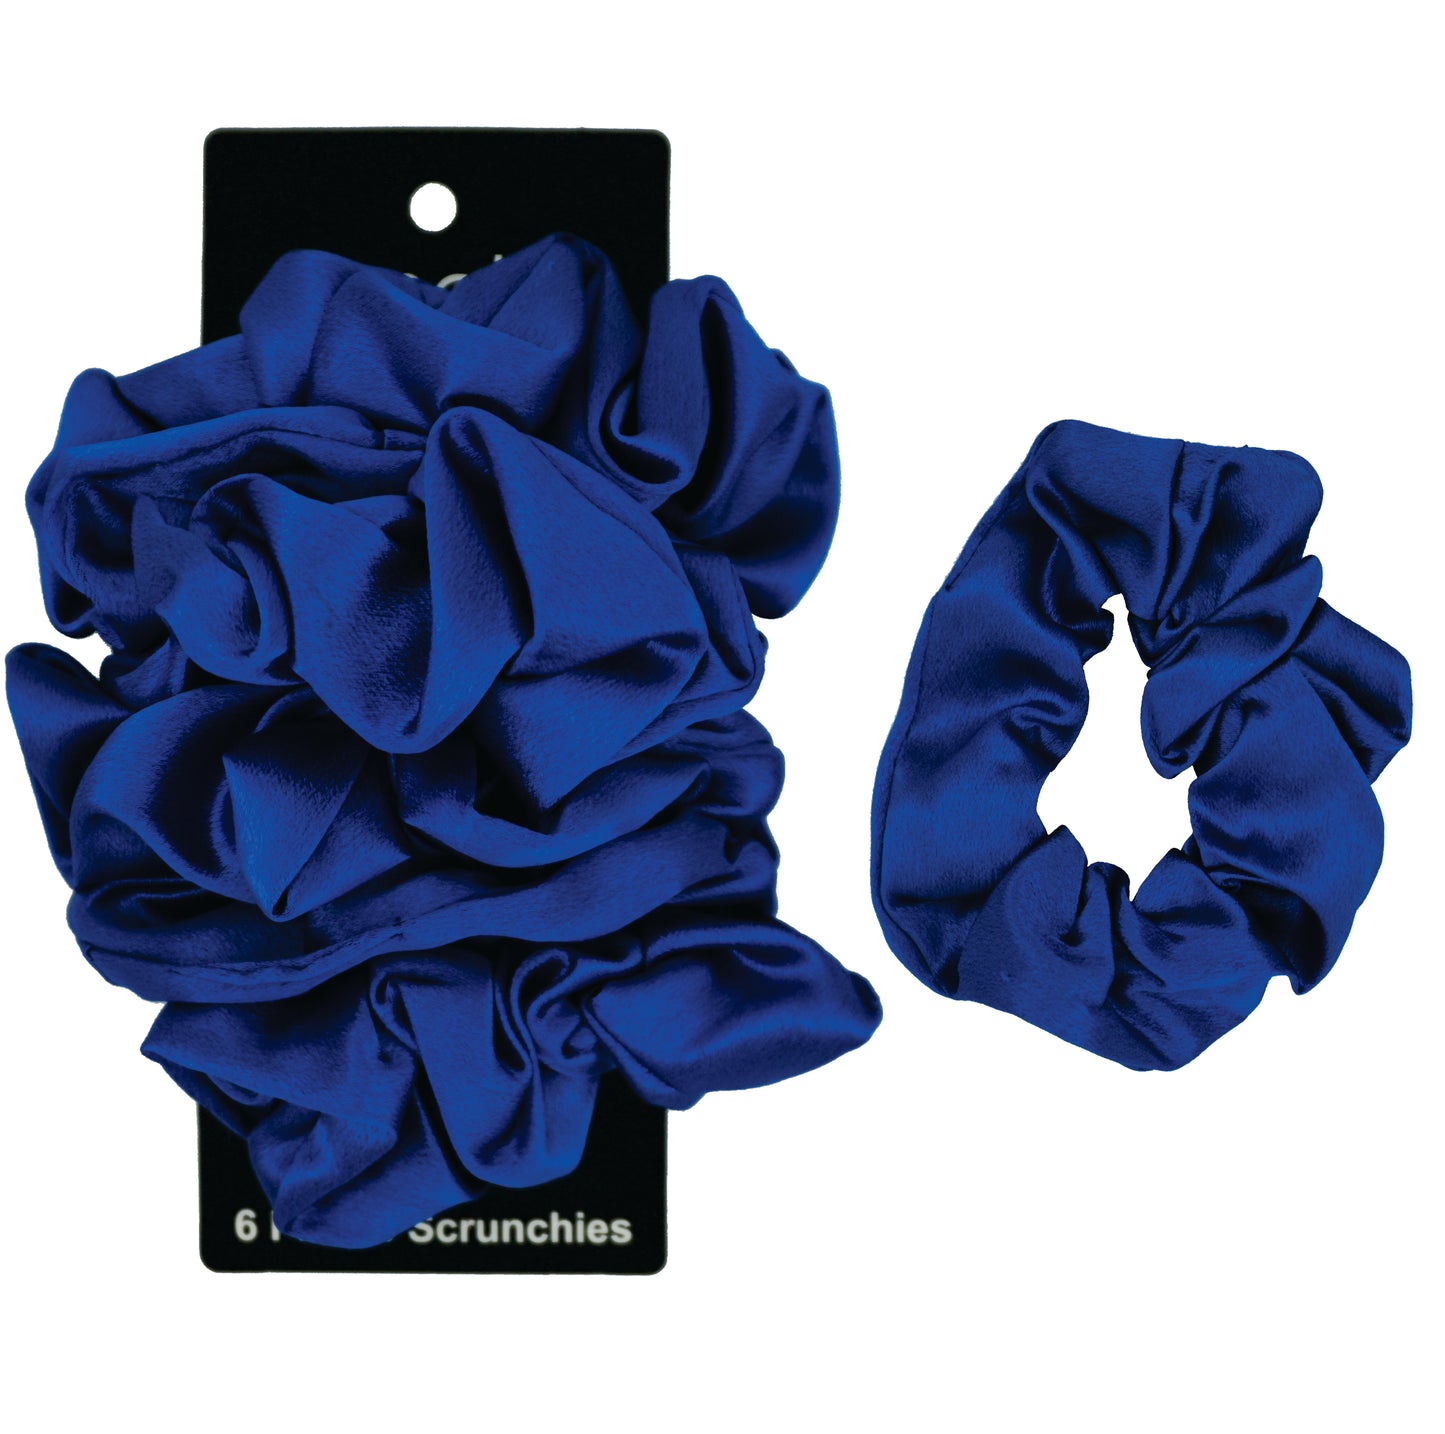 Amelia Beauty Products, Blue Imitation Silk Scrunchies, 4.5in Diameter, Gentle on Hair, Strong Hold, No Snag, No Dents or Creases. 6 Pack